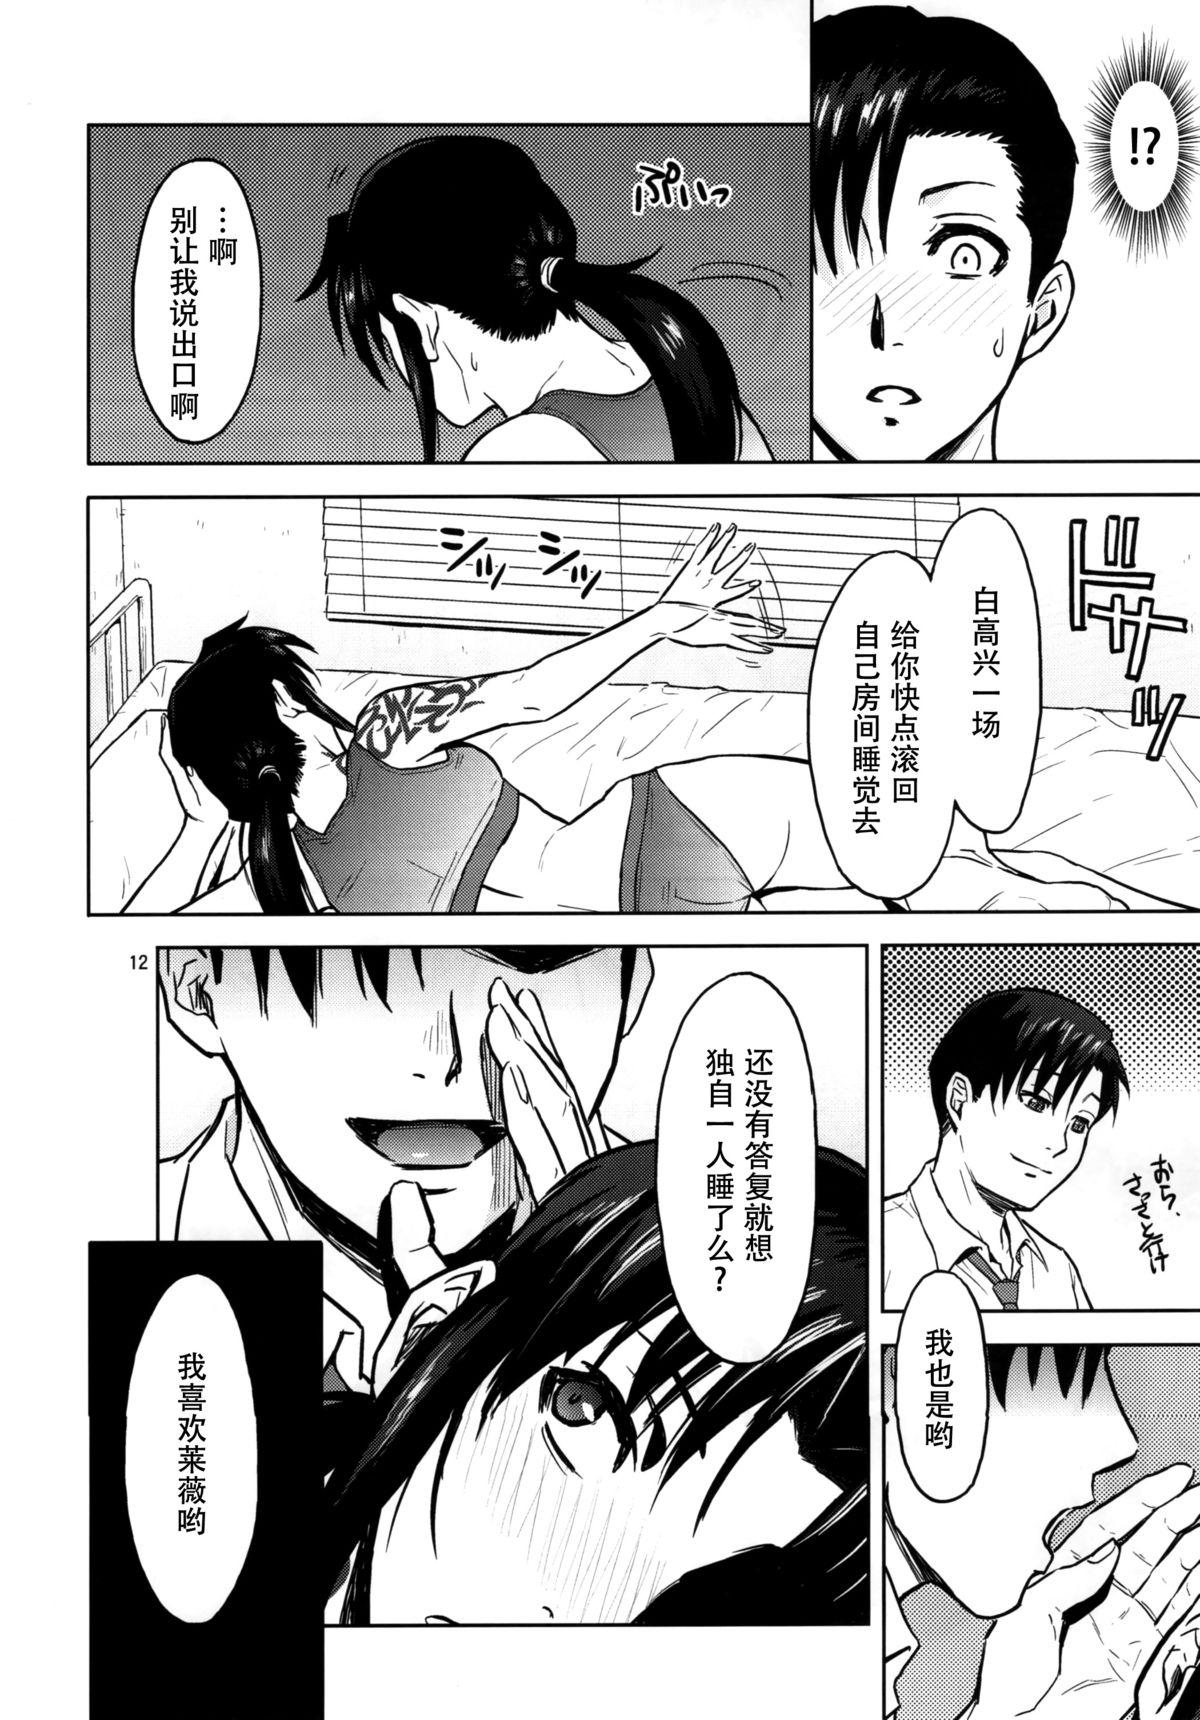 Sologirl Sick from drinking - Black lagoon Que - Page 13